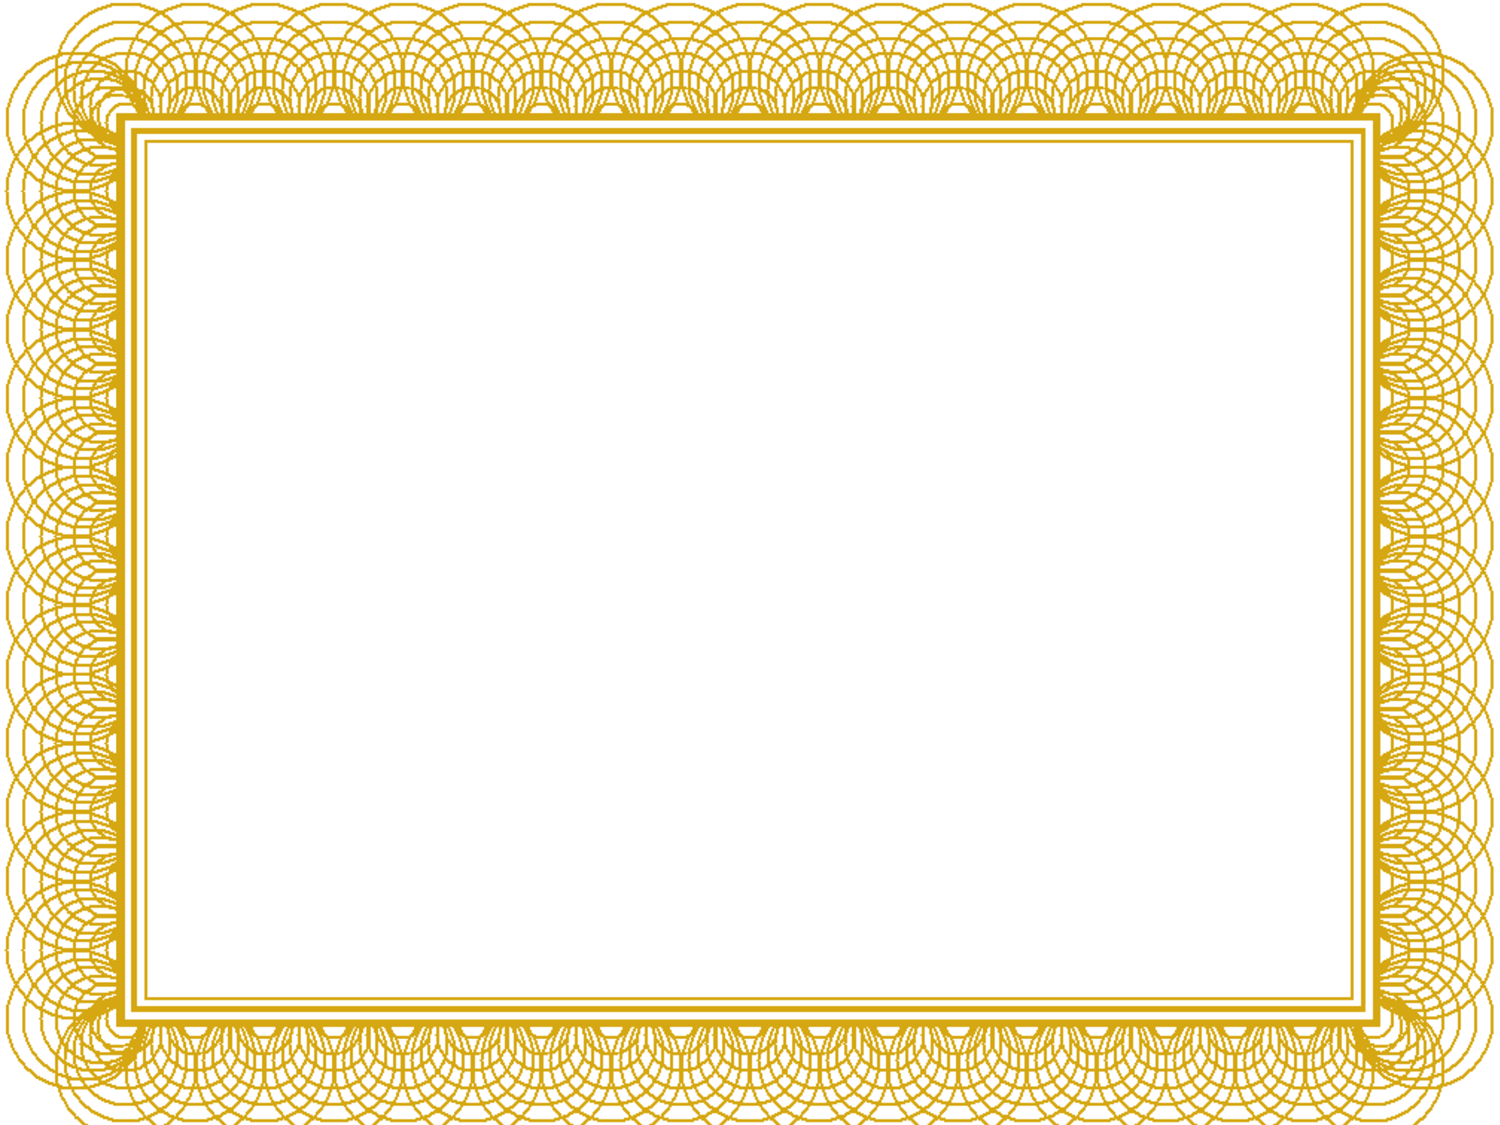 Black Background With Gold Border